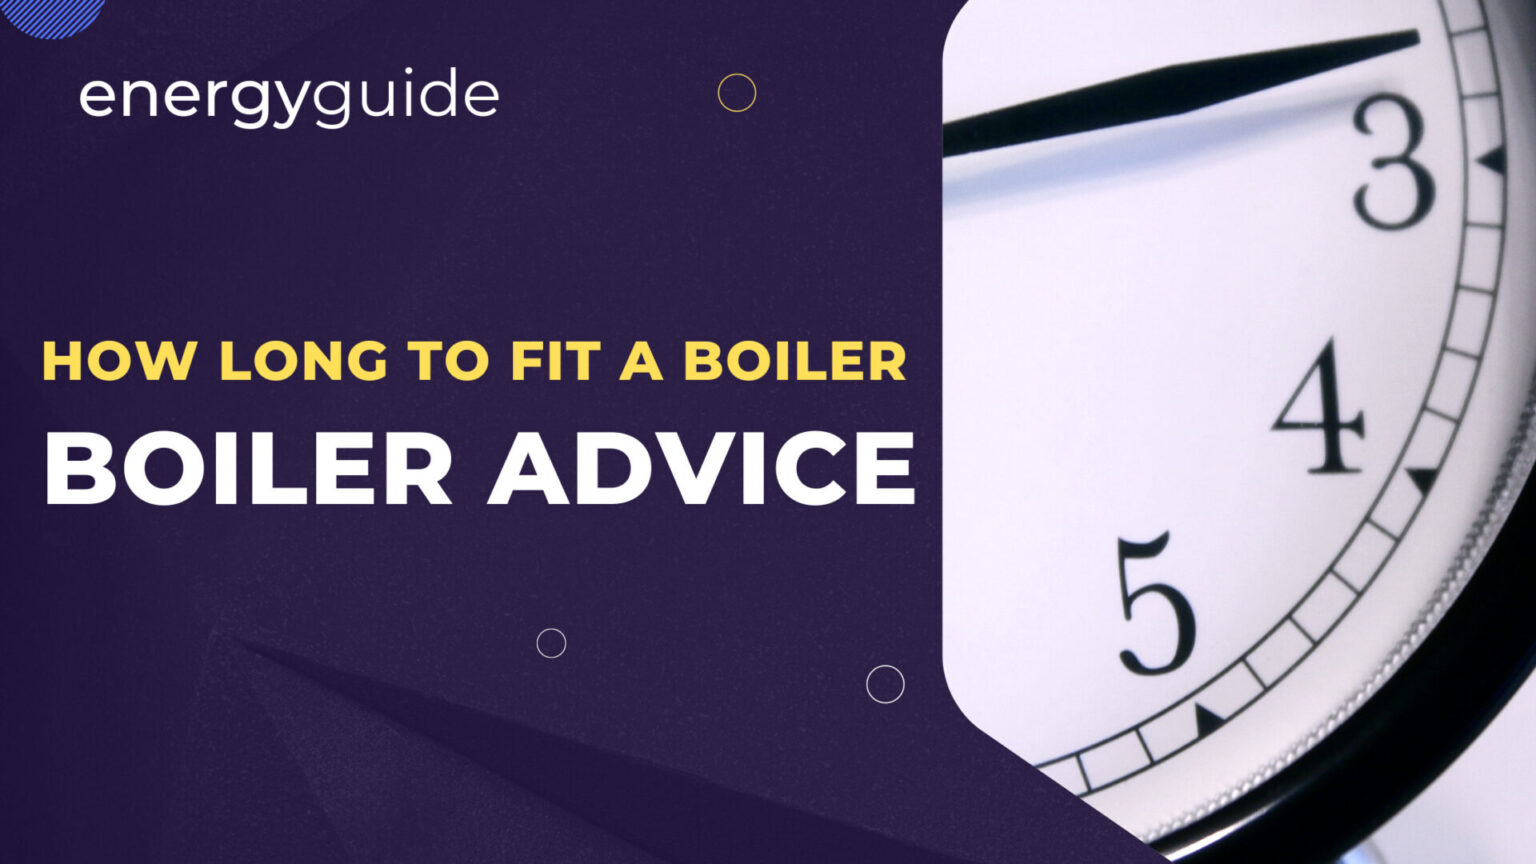 How long does it take to fit a boiler